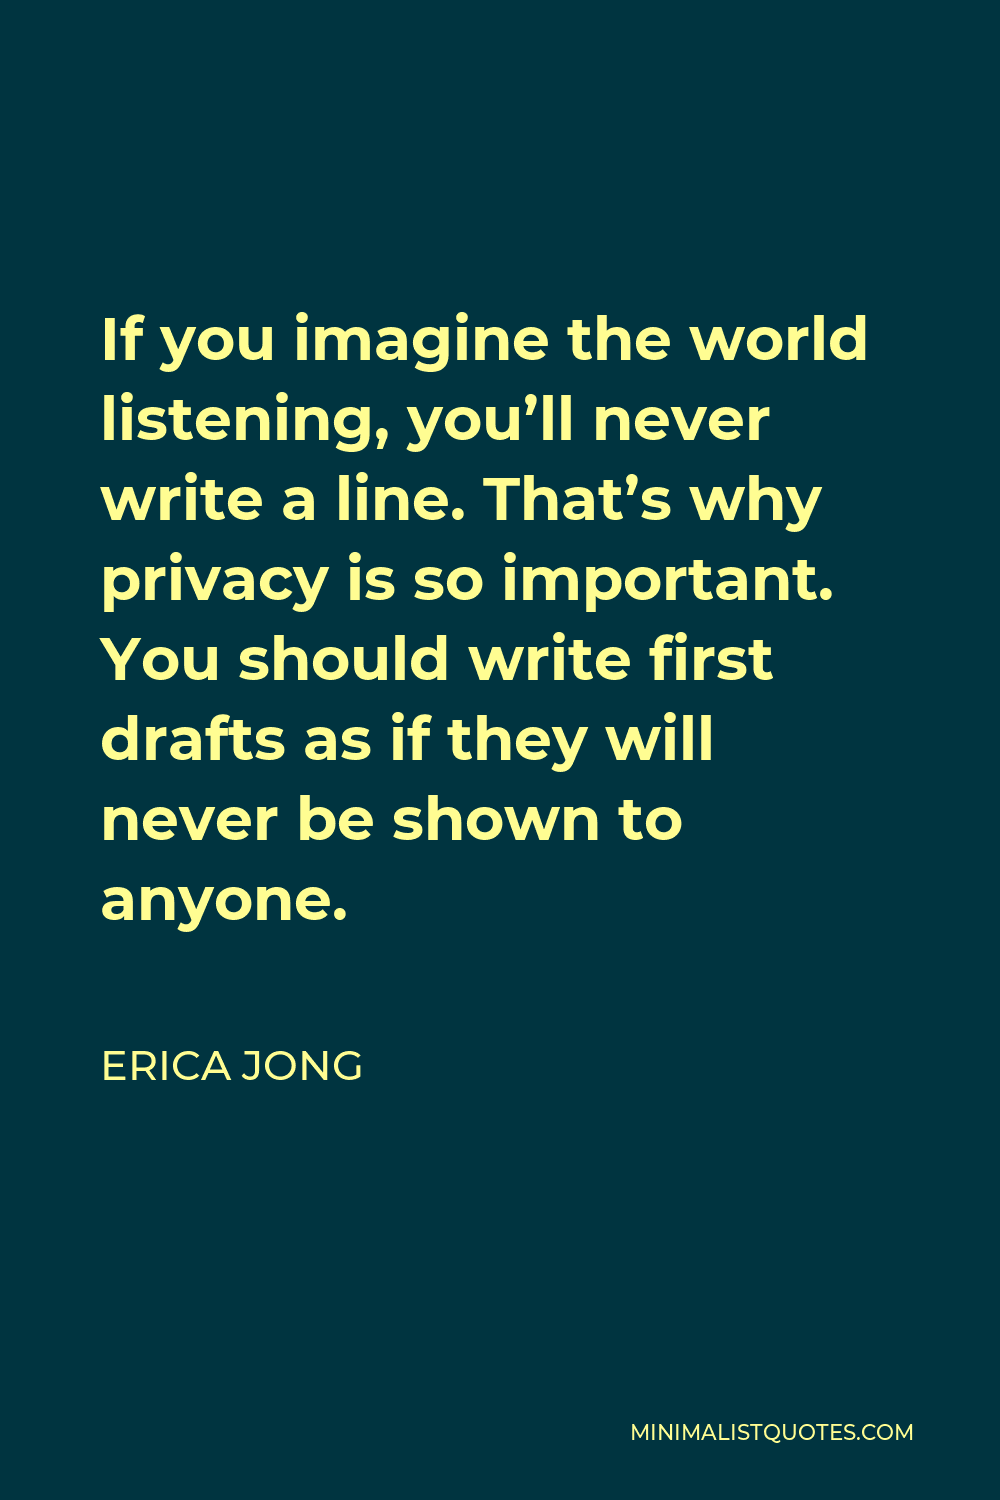 Erica Jong Quote - If you imagine the world listening, you’ll never write a line. That’s why privacy is so important. You should write first drafts as if they will never be shown to anyone.